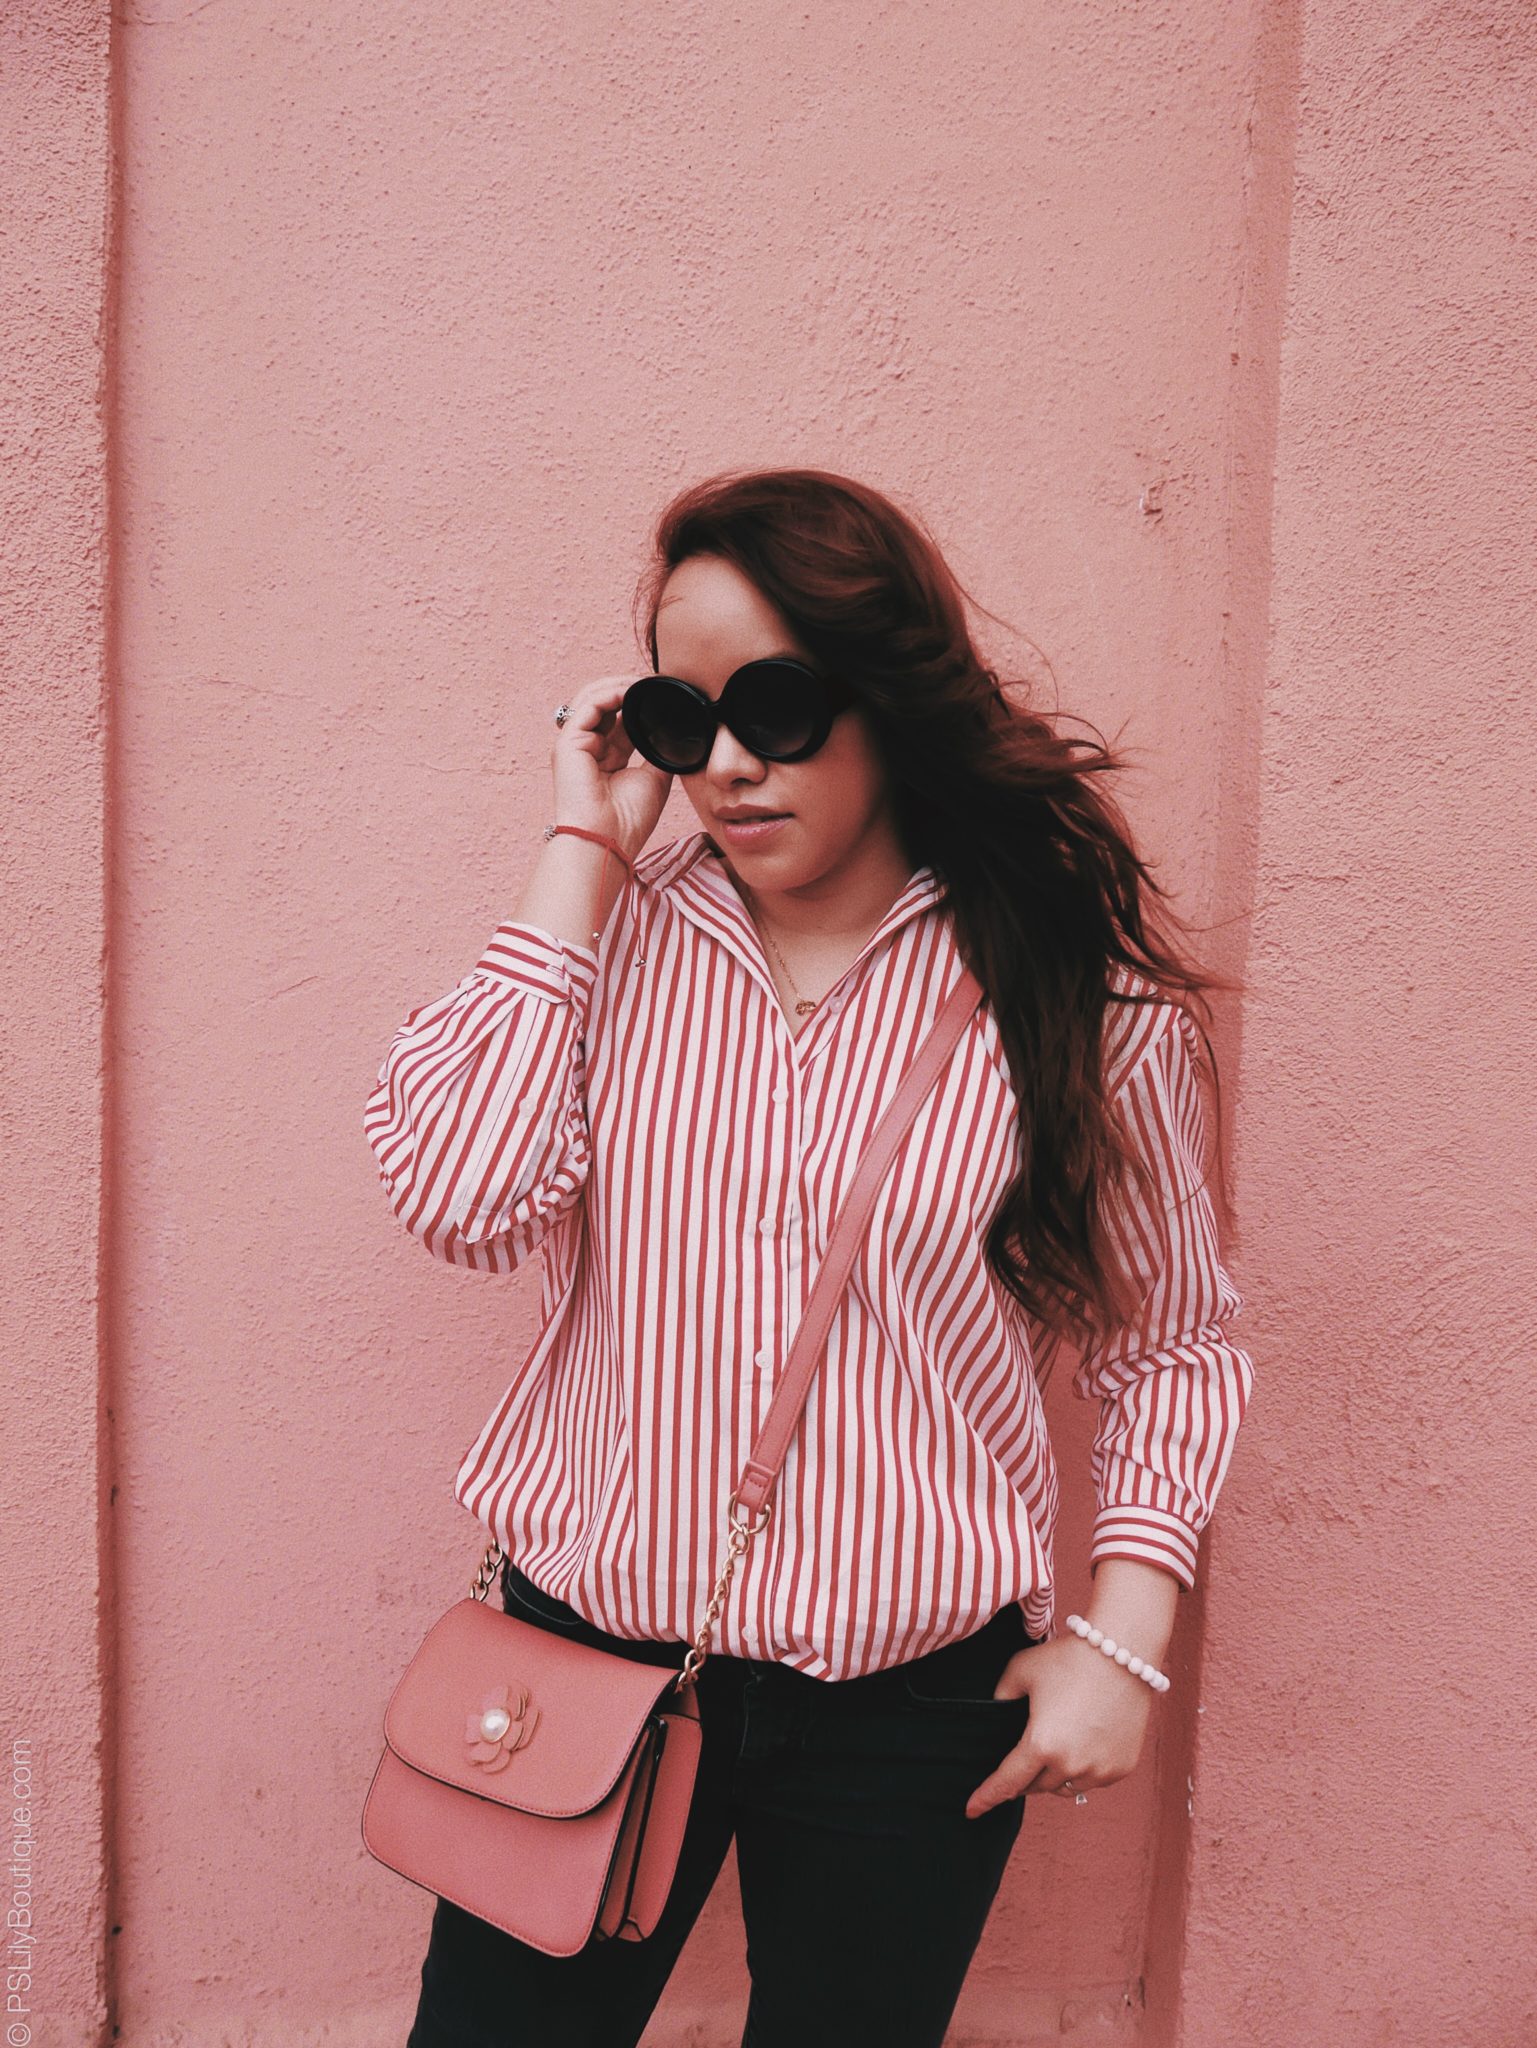 Stars and Stripes, Instagram: @pslilyboutique, Pinterest, Los Angeles fashion blogger, top fashion blog, best fashion blog, fashion & personal style blog, travel blog, travel blogger, LA fashion blogger, H&M Red and White Stripes Shirt, Round Black Sunglasses, Andrew Marc Salmon Pink Crossbody with pearl flower detail bag, long hair, bracelet, Nine West Jeans, ootd, Spring & Summer 2018 outfit ideas, 6.25.18